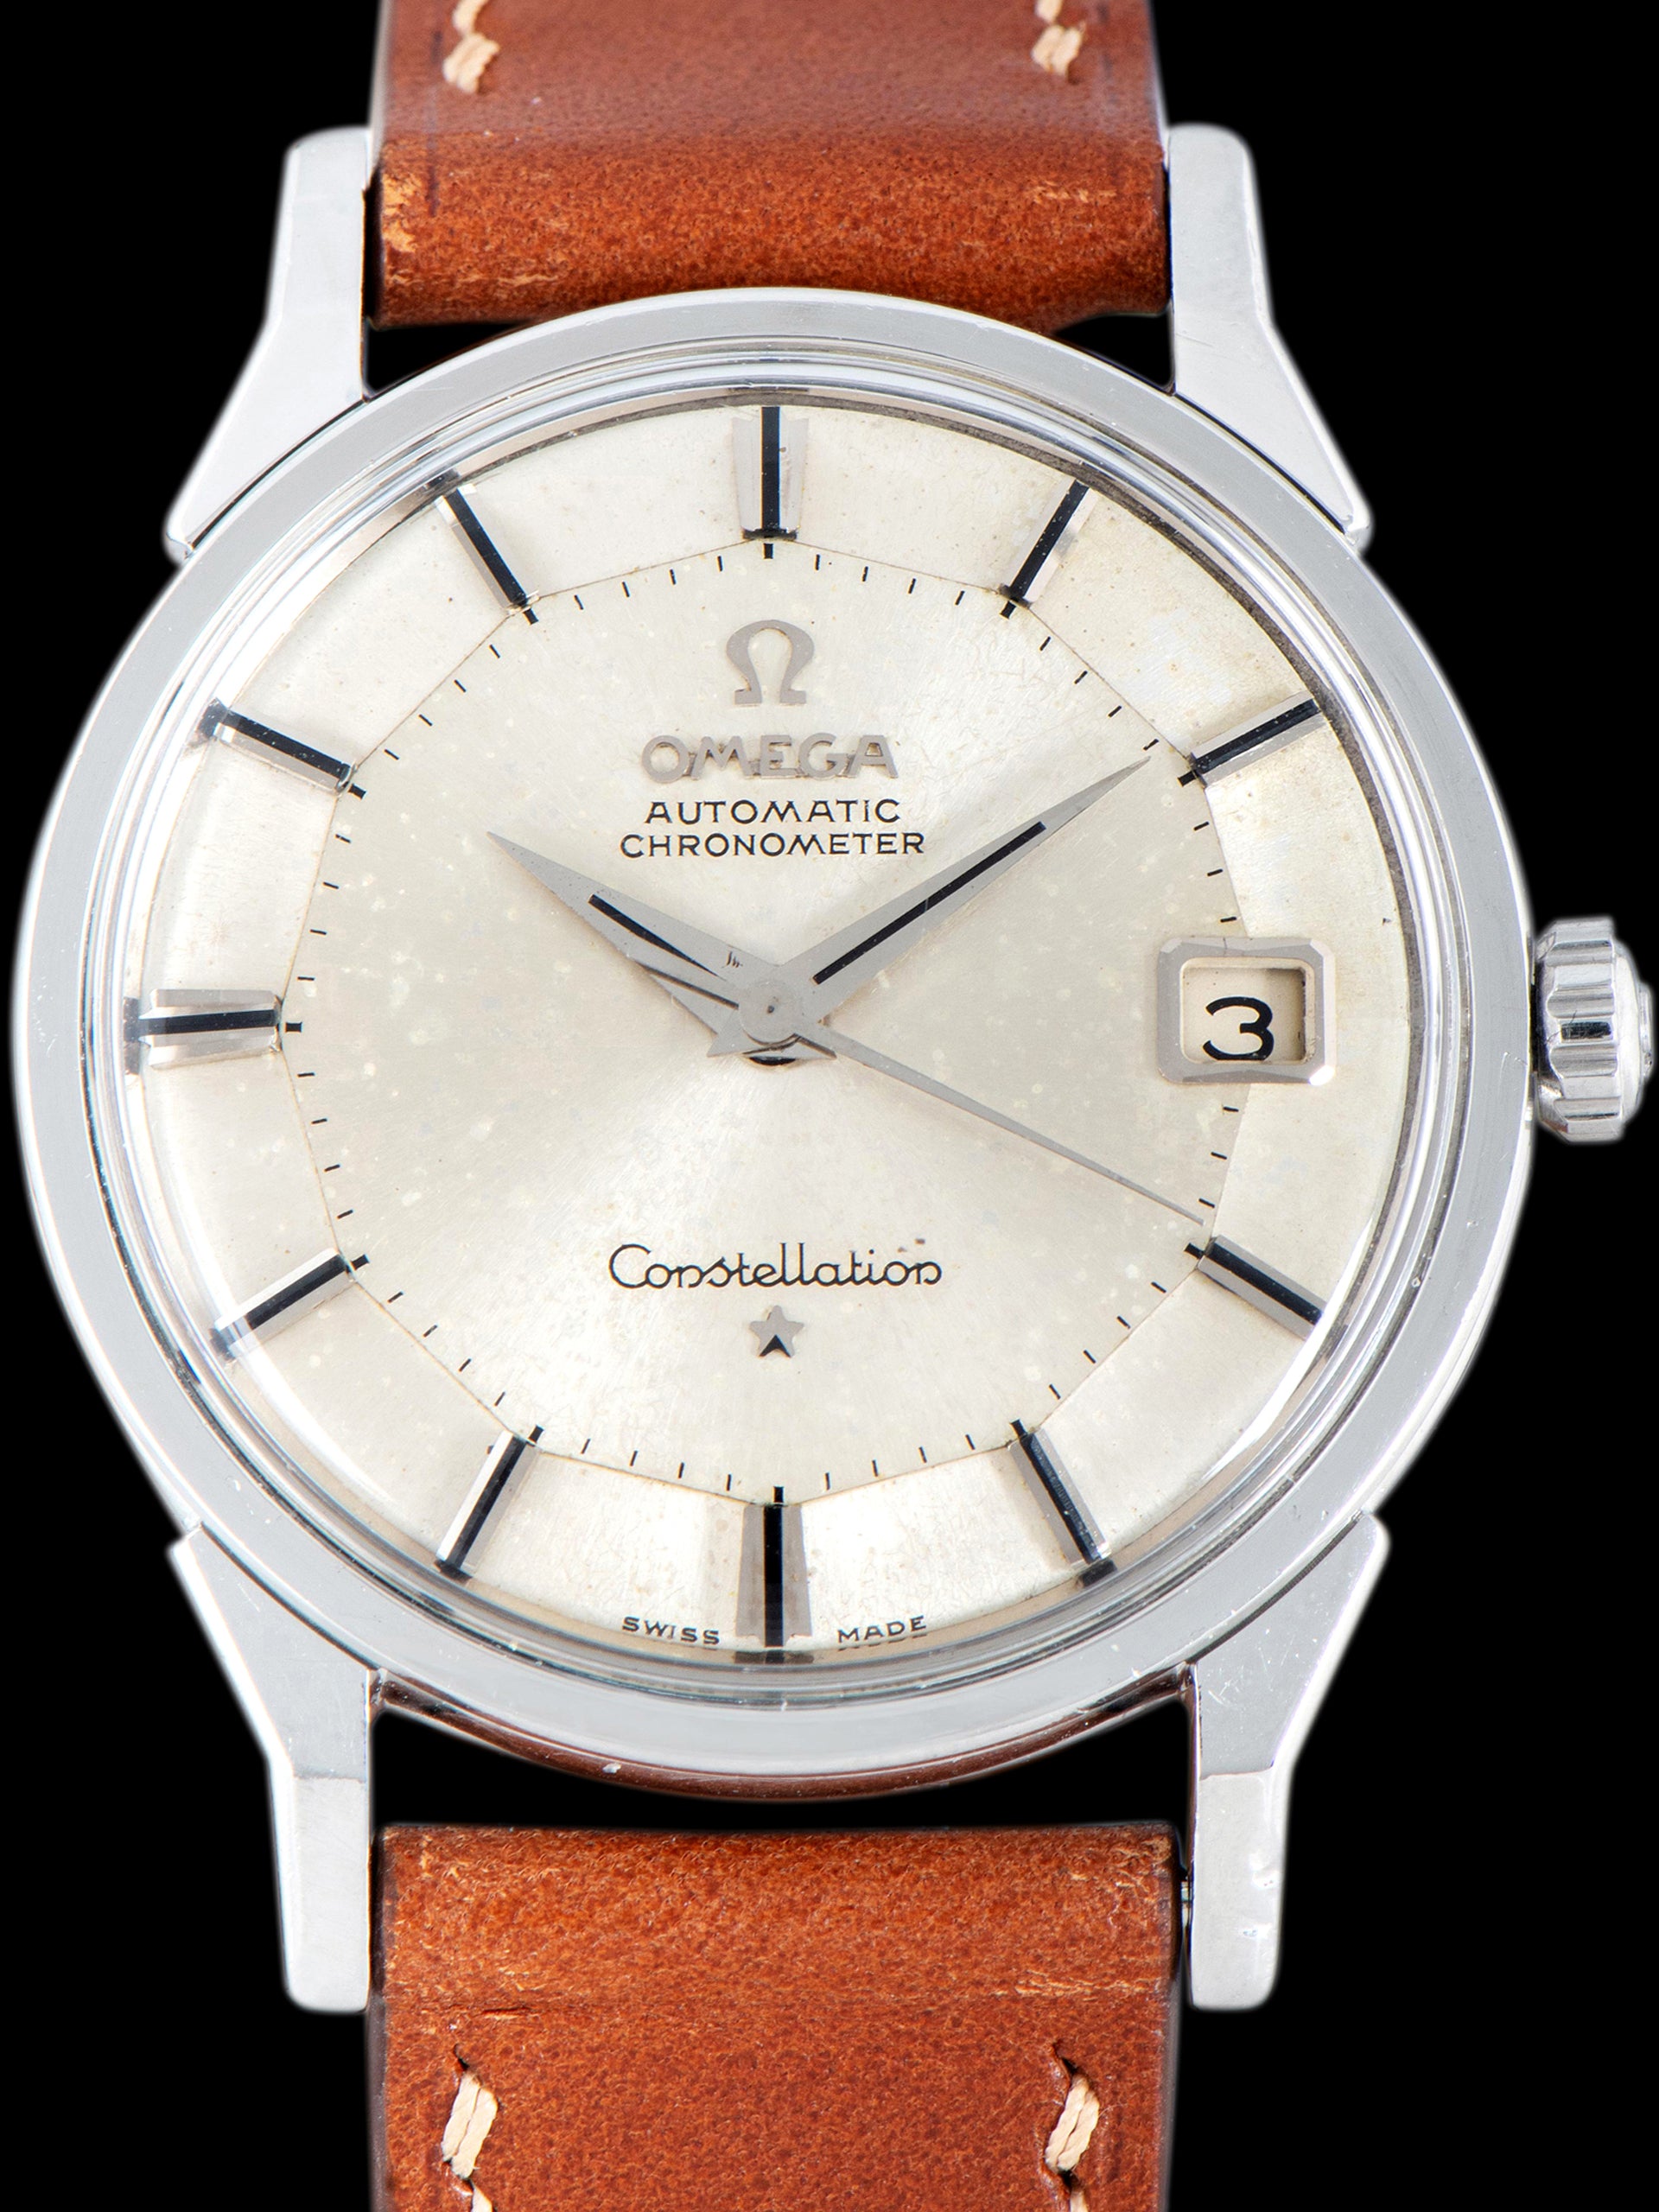 1962 Omega Constellation (Ref. 14902 62 SC) Silver "Pie Pan" Dial